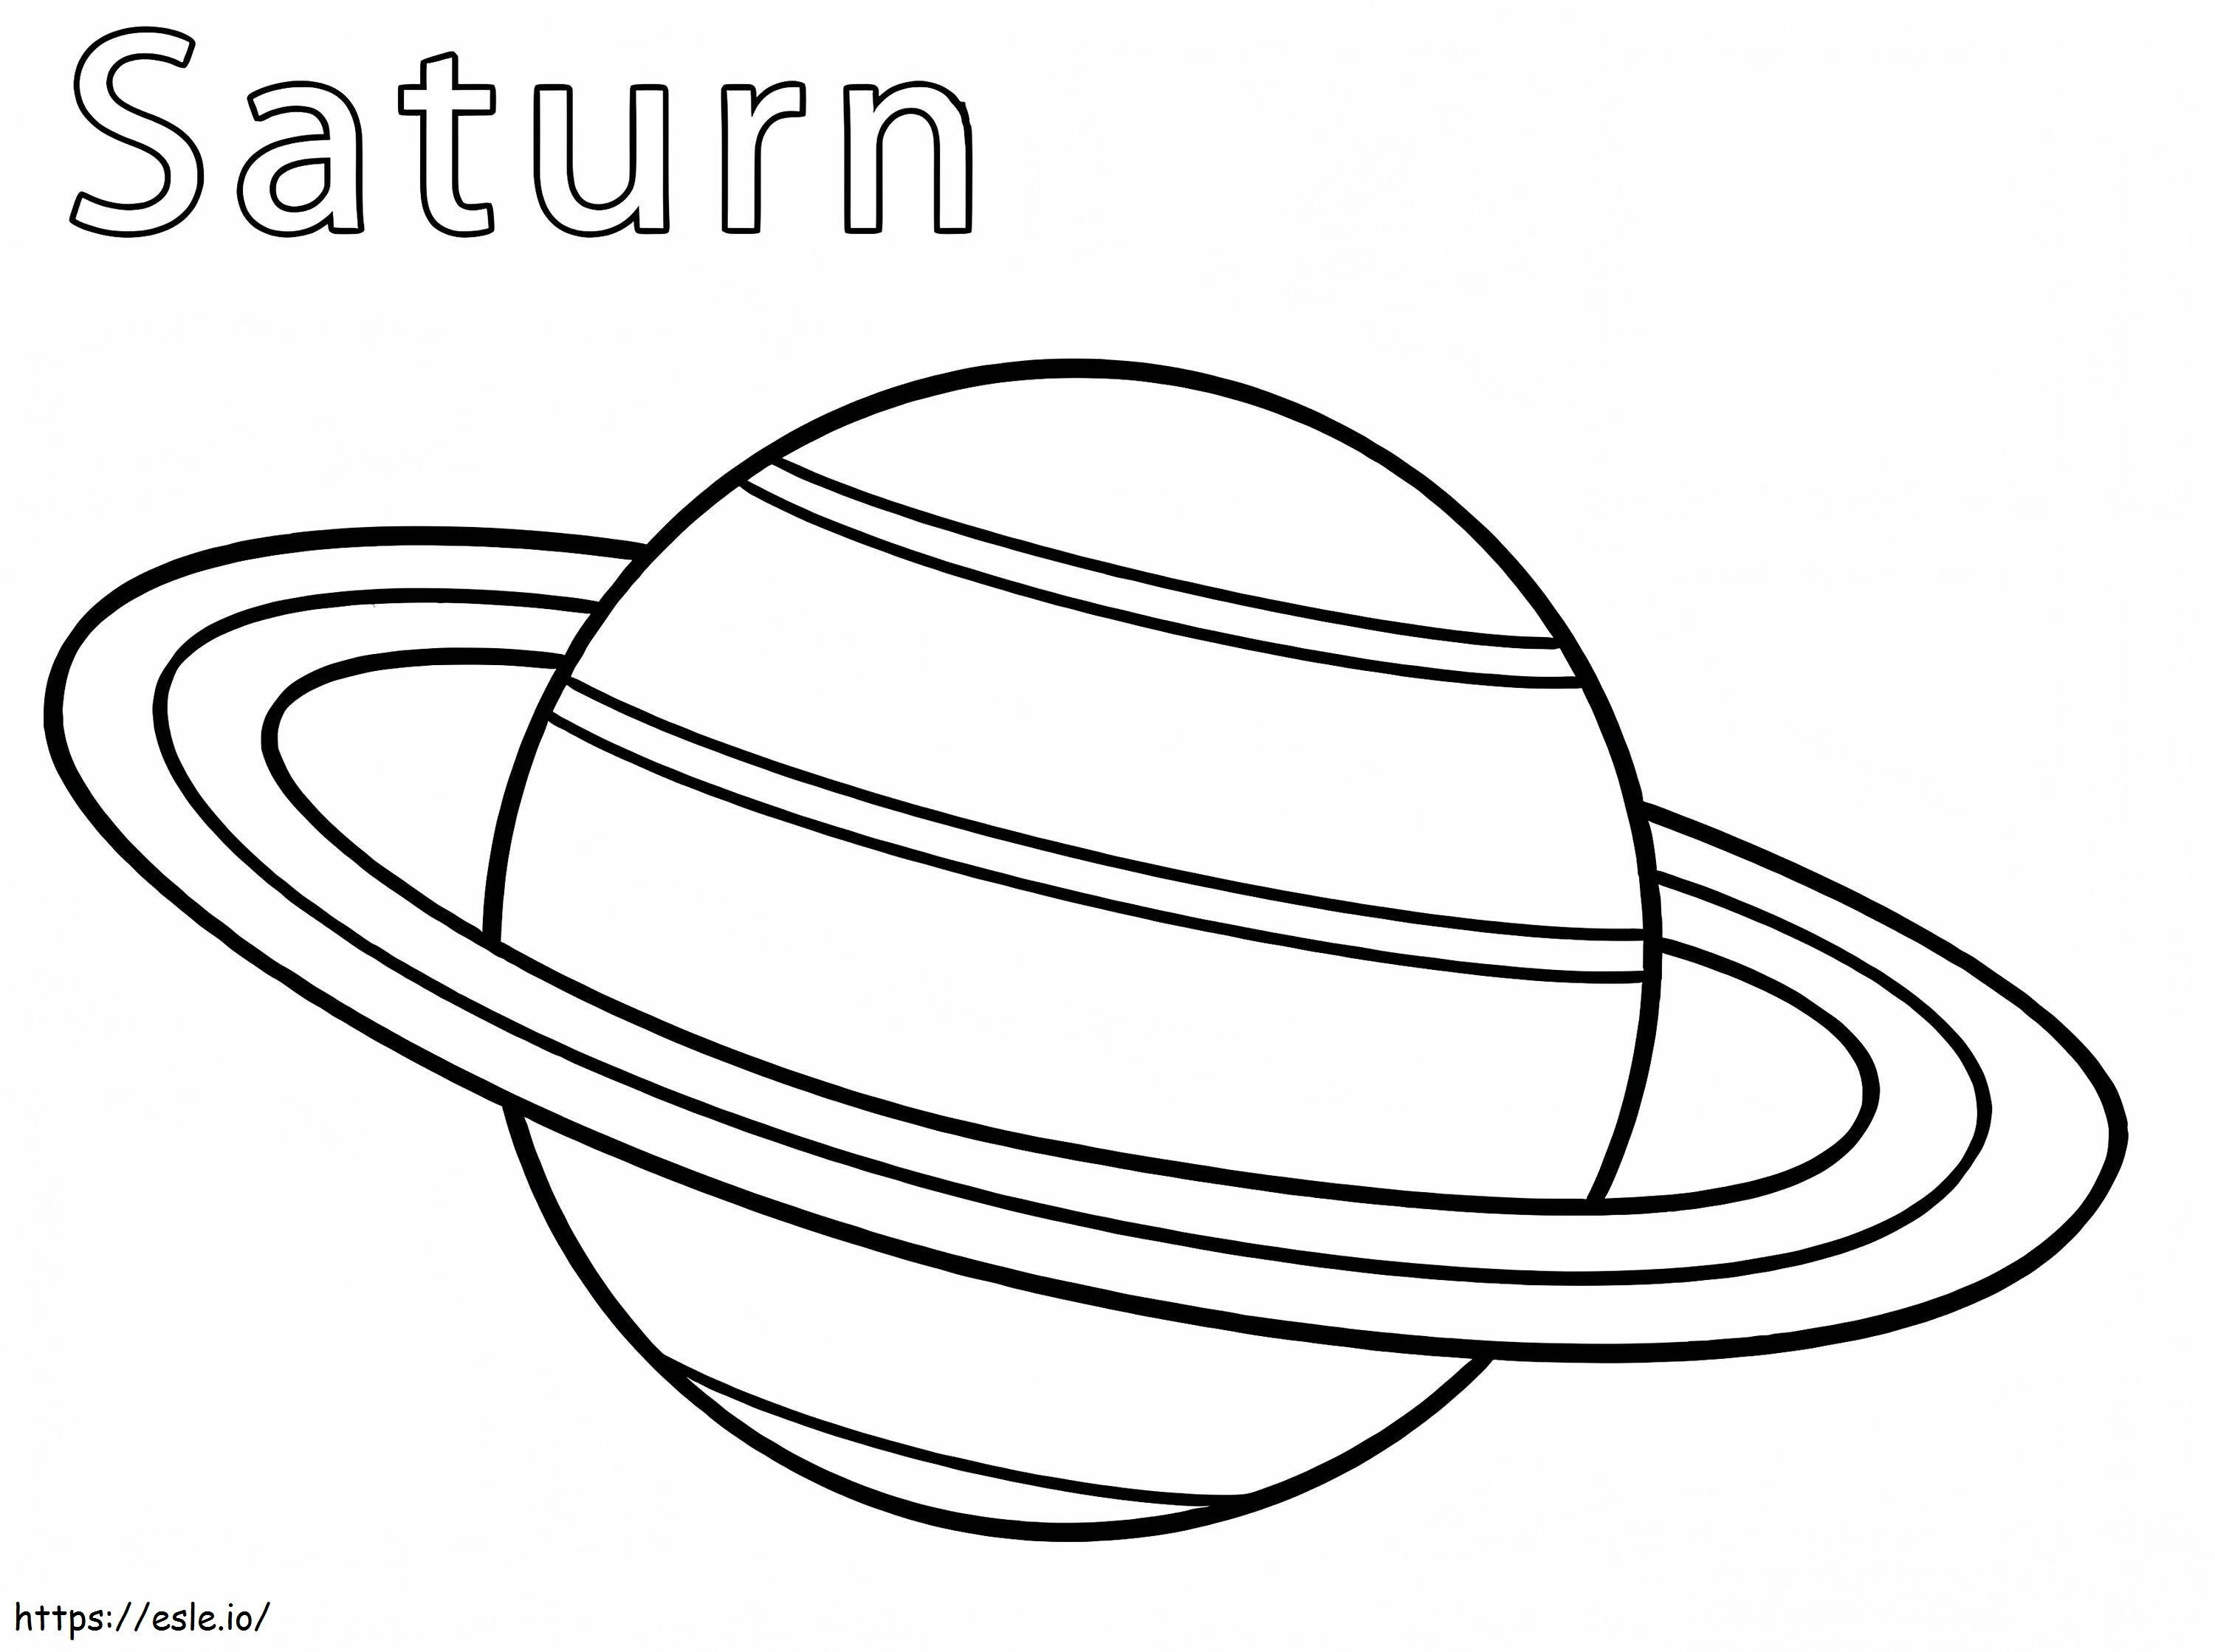 Planets Saturn coloring page